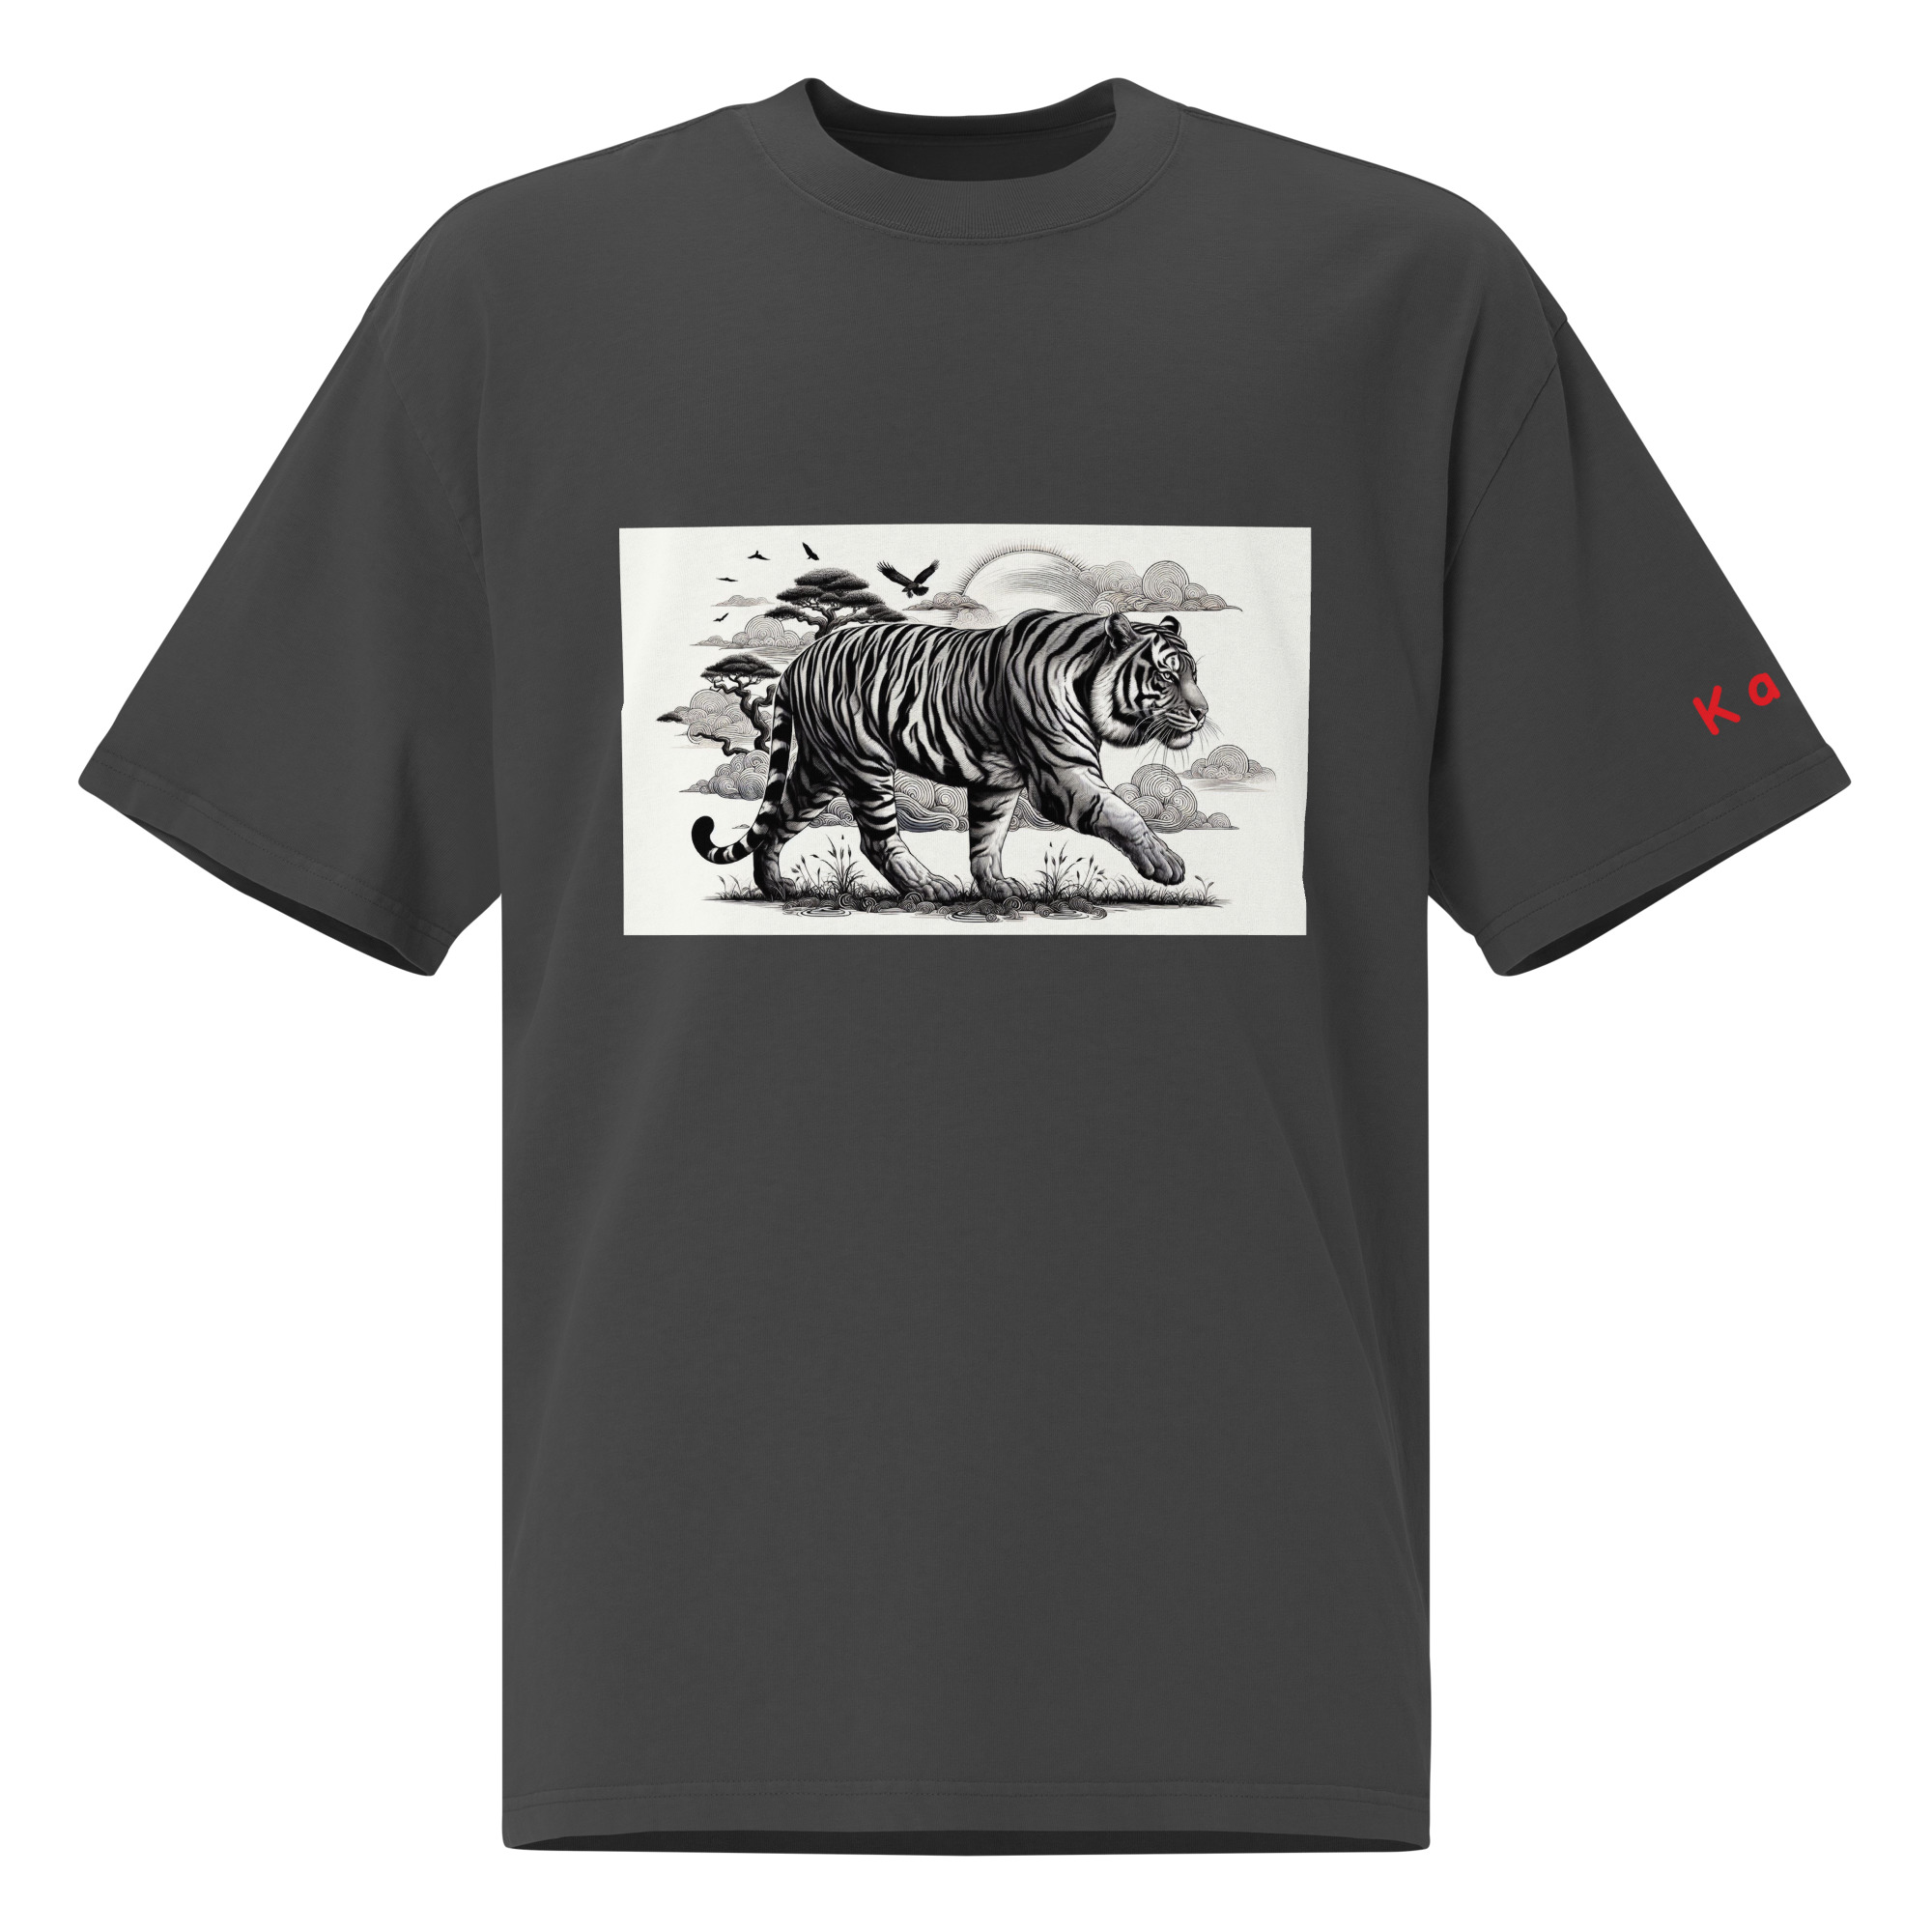 Tiger is on a walk Oversized faded t-shirt